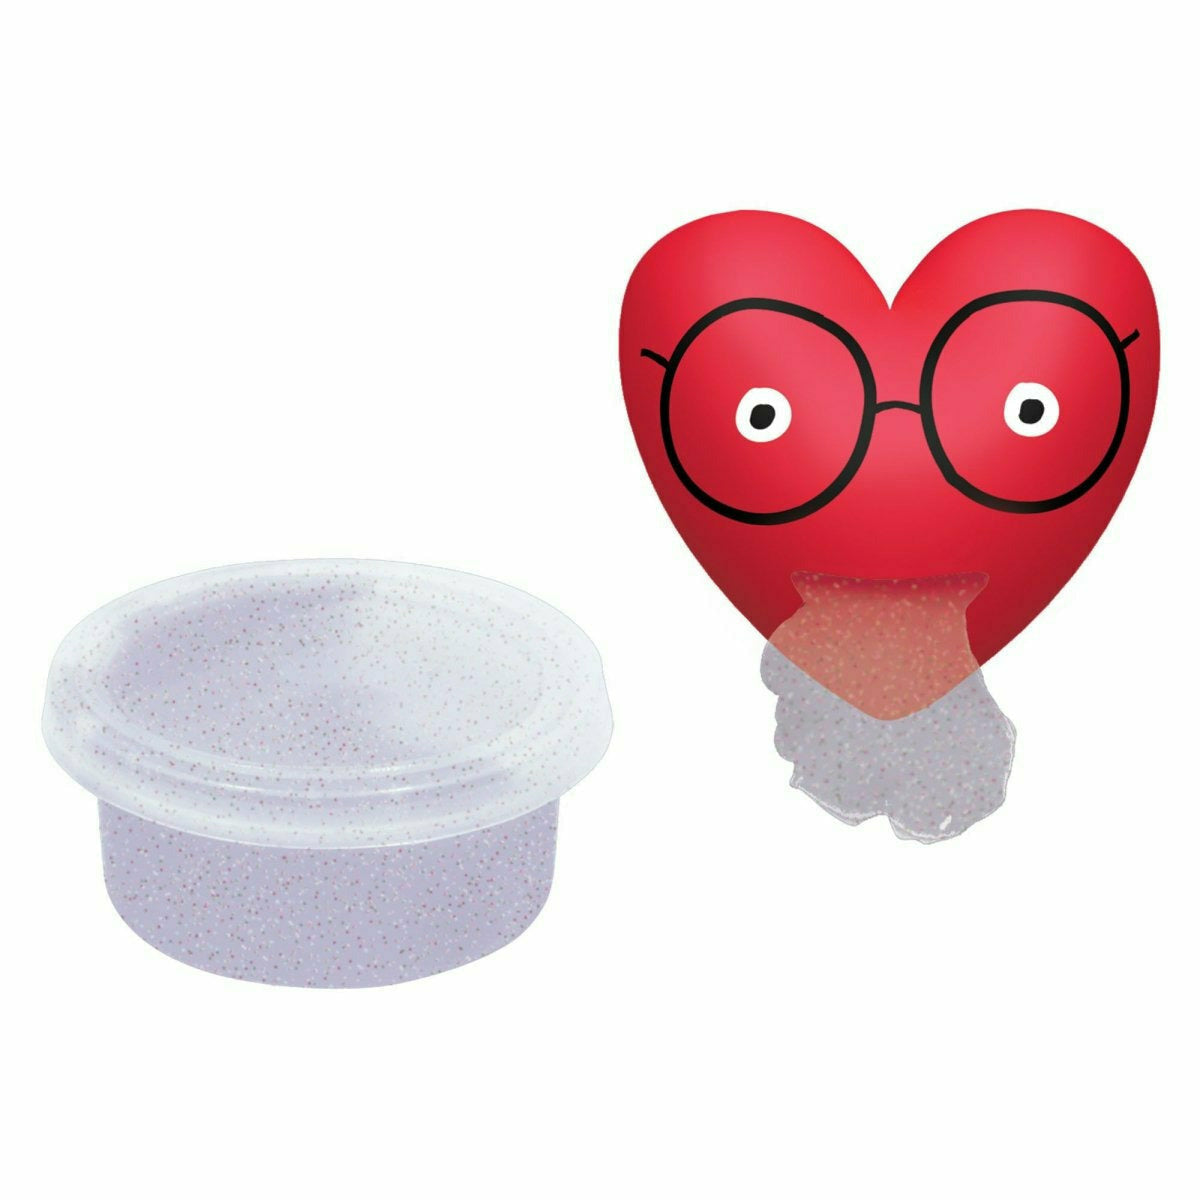 Amscan HOLIDAY: VALENTINES Oozing Heart Slime Valentine's Day